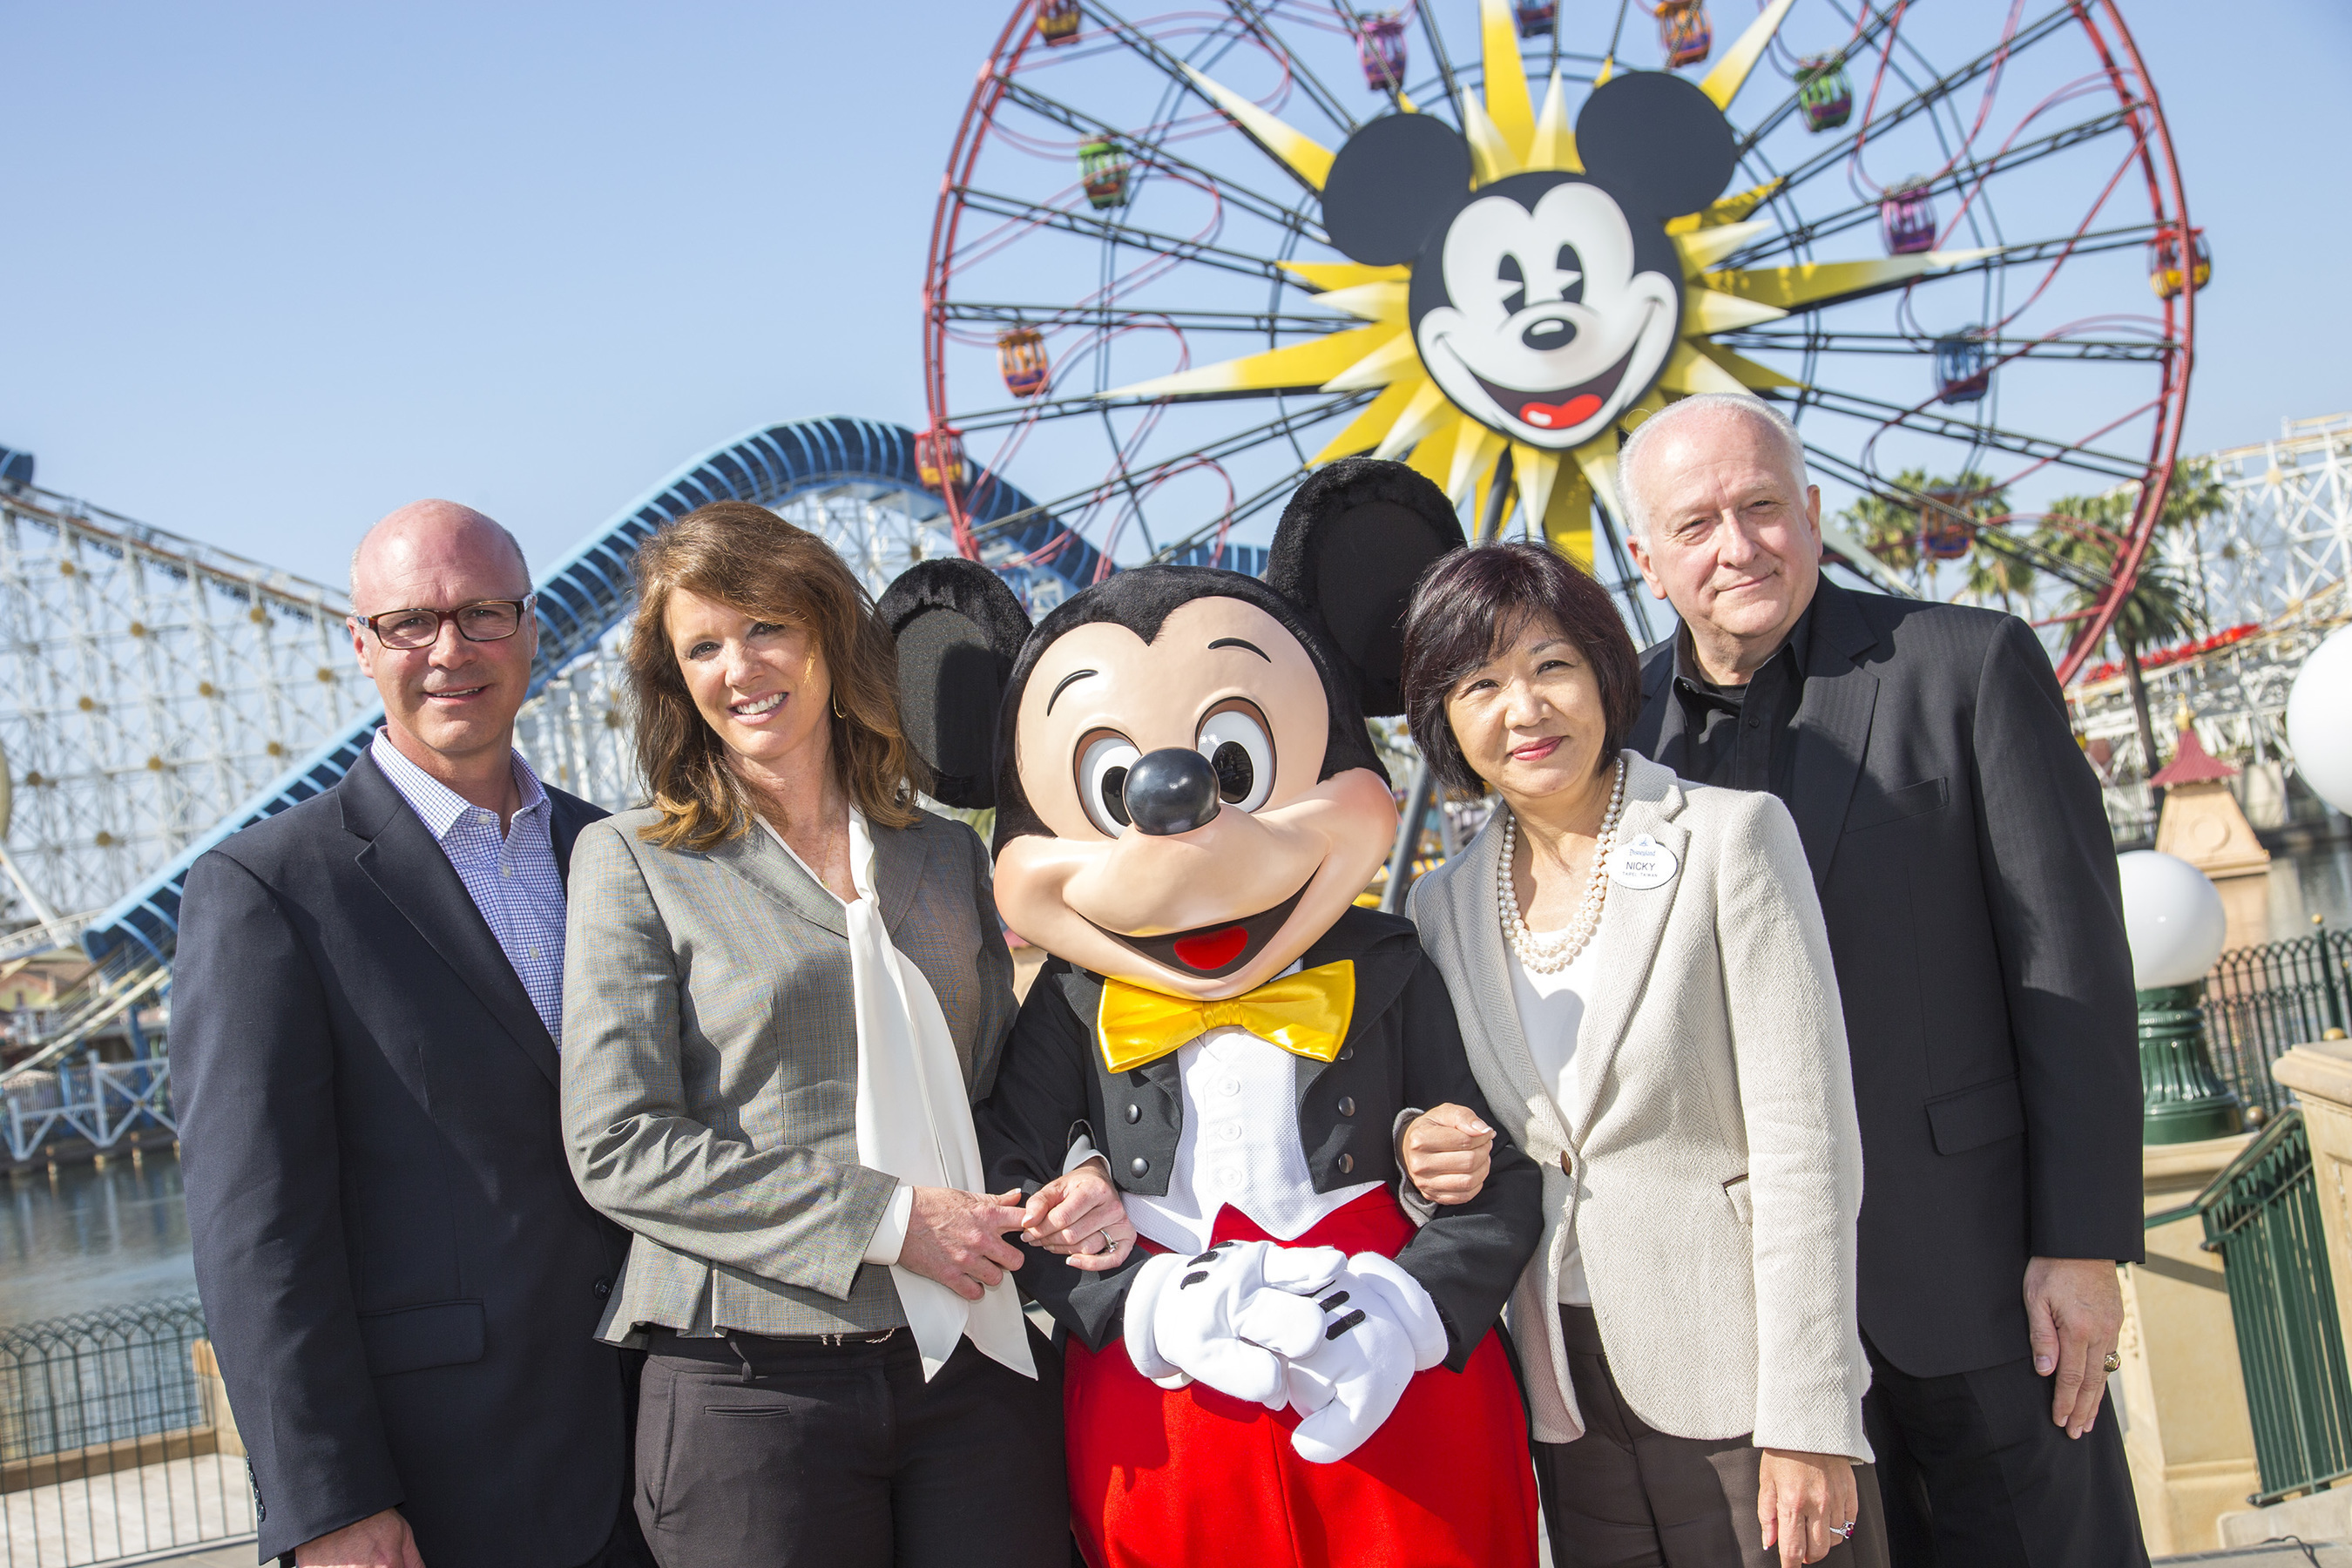 April 15 Press Conference at Disney's California Adventure to announce largest singular group of Chinese travelers ever to visit the U.S.  First stop is Orange County, CA.  Speakers: Caroline Betata, VisitCalifornia; Ed Fuller, Orange County Visitors Association; Jay Buress, Anaheim/OC CVB; Nicky Tang, Disney. (PRNewsFoto/Orange County Visitors Assoc.)